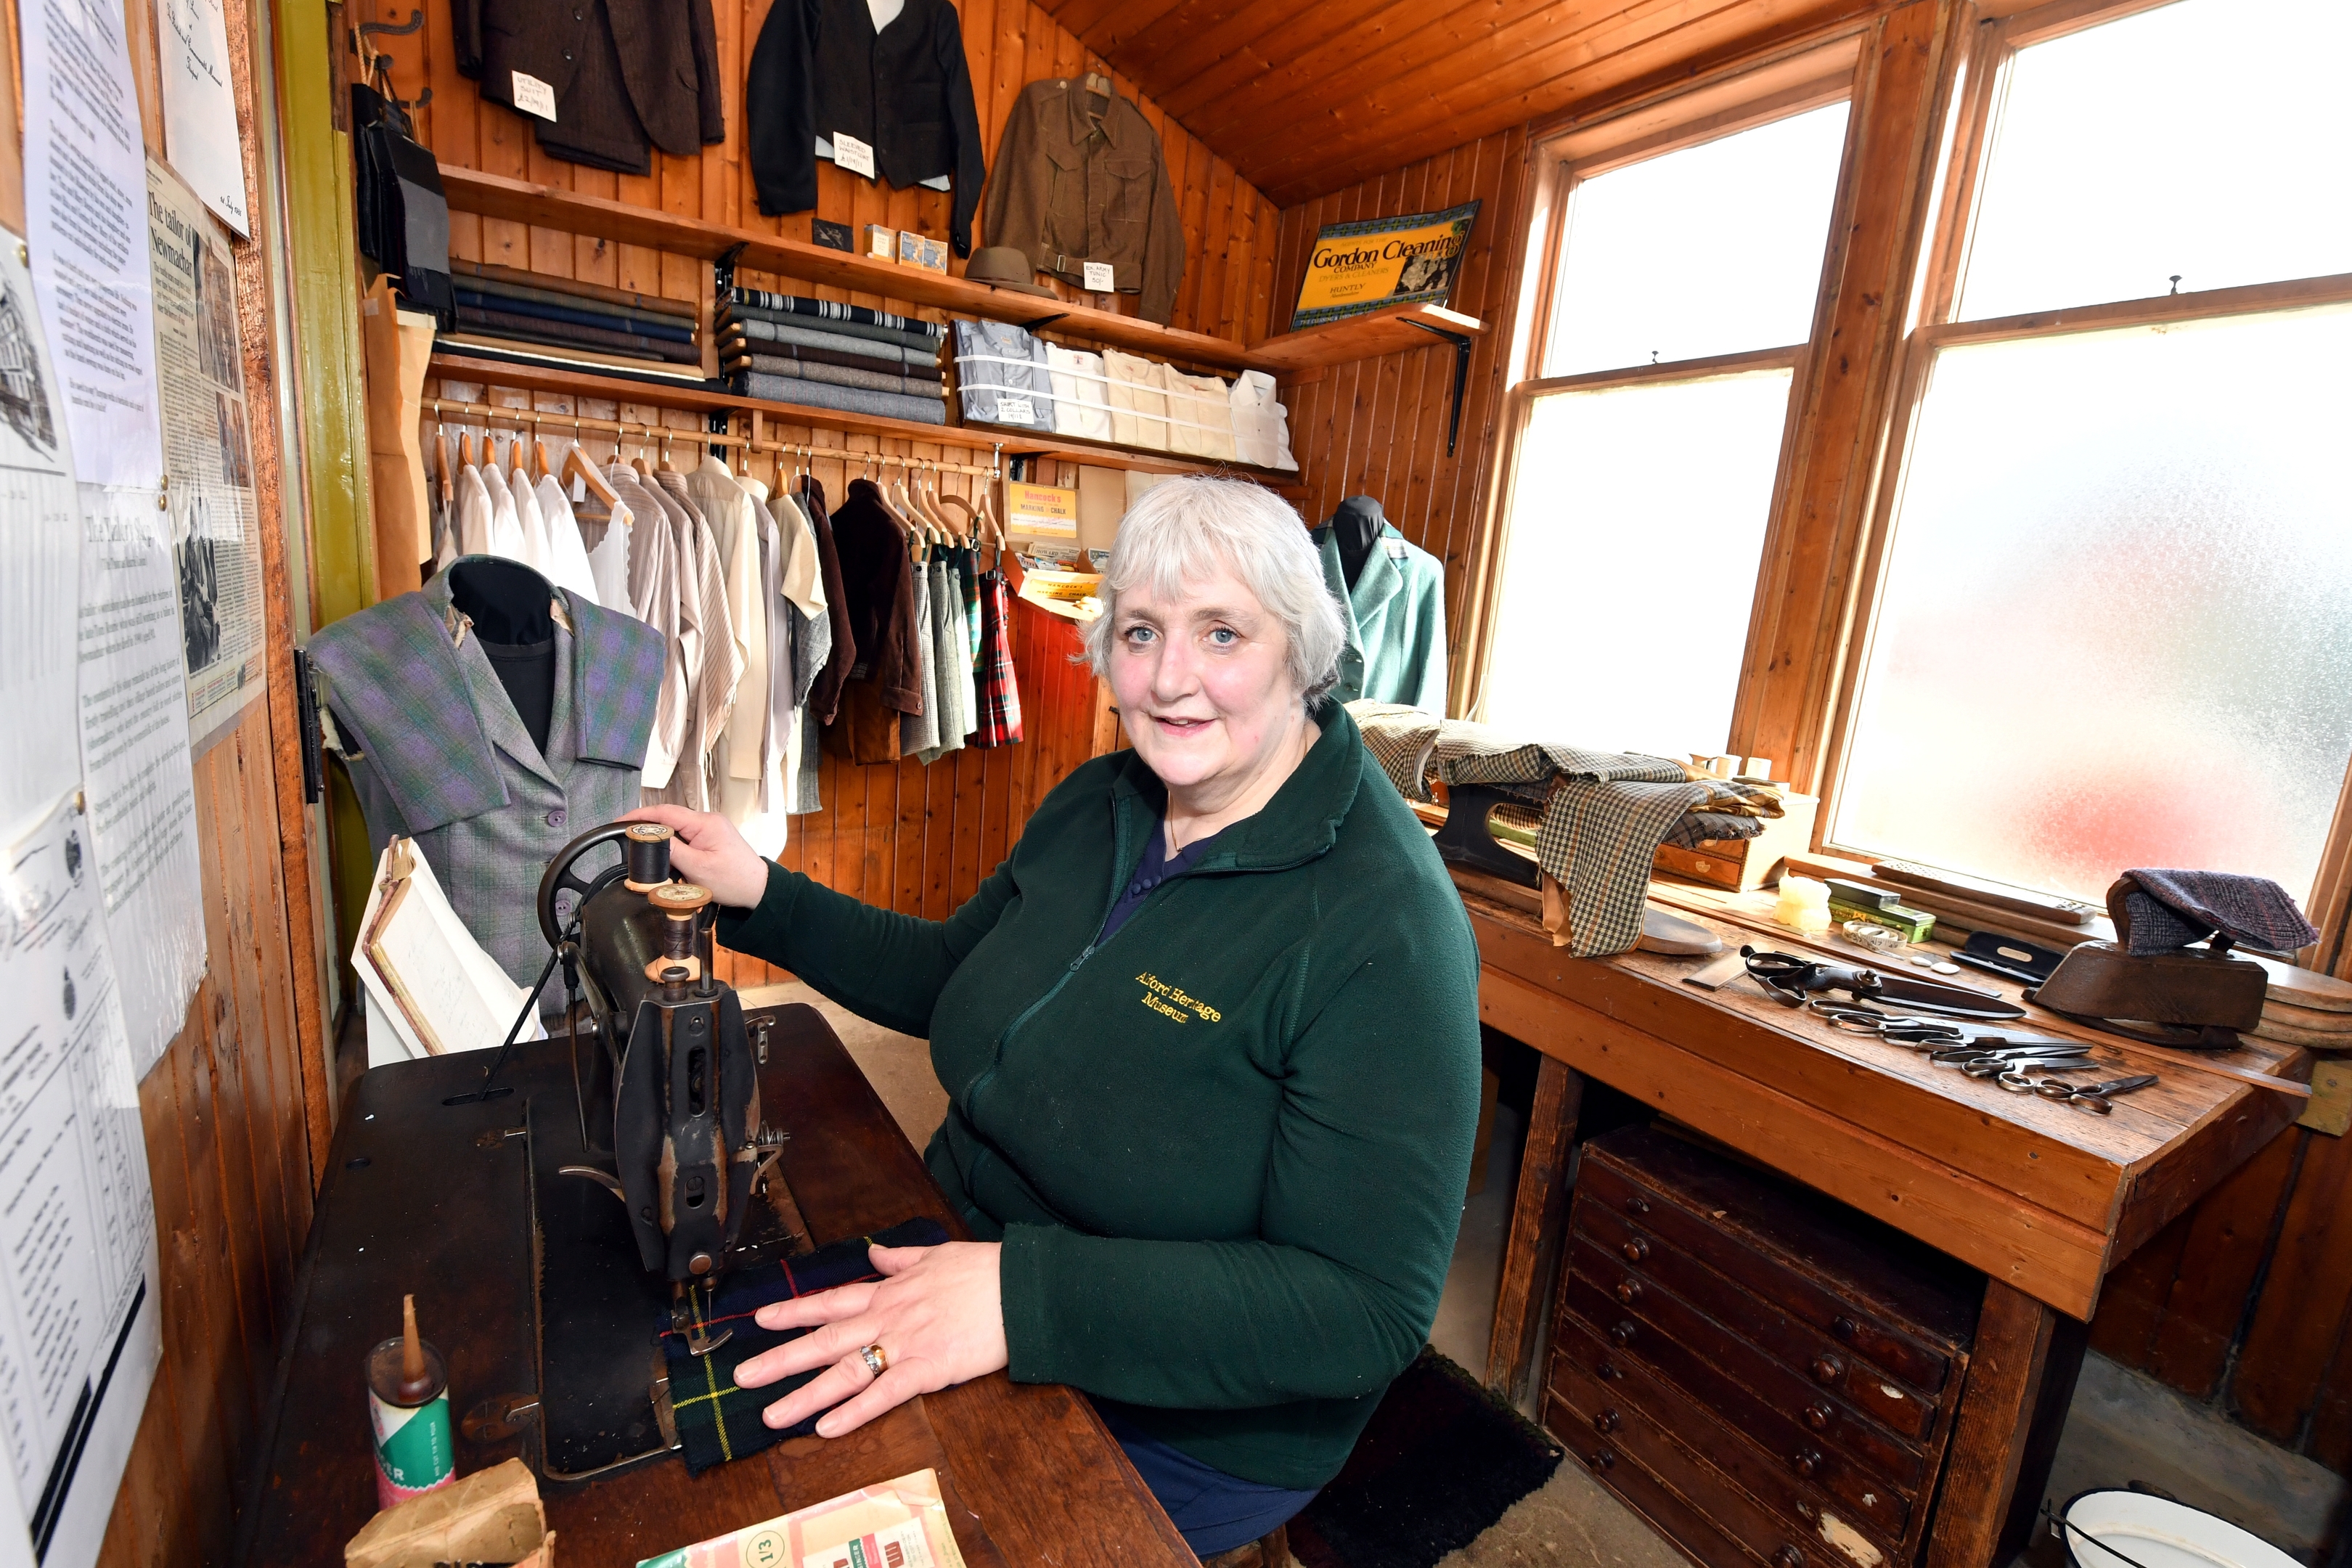 Dorothy Anderson in the recreation of the Thomas Rearie tailors shop at the museum. Pics by Kami Thomson.